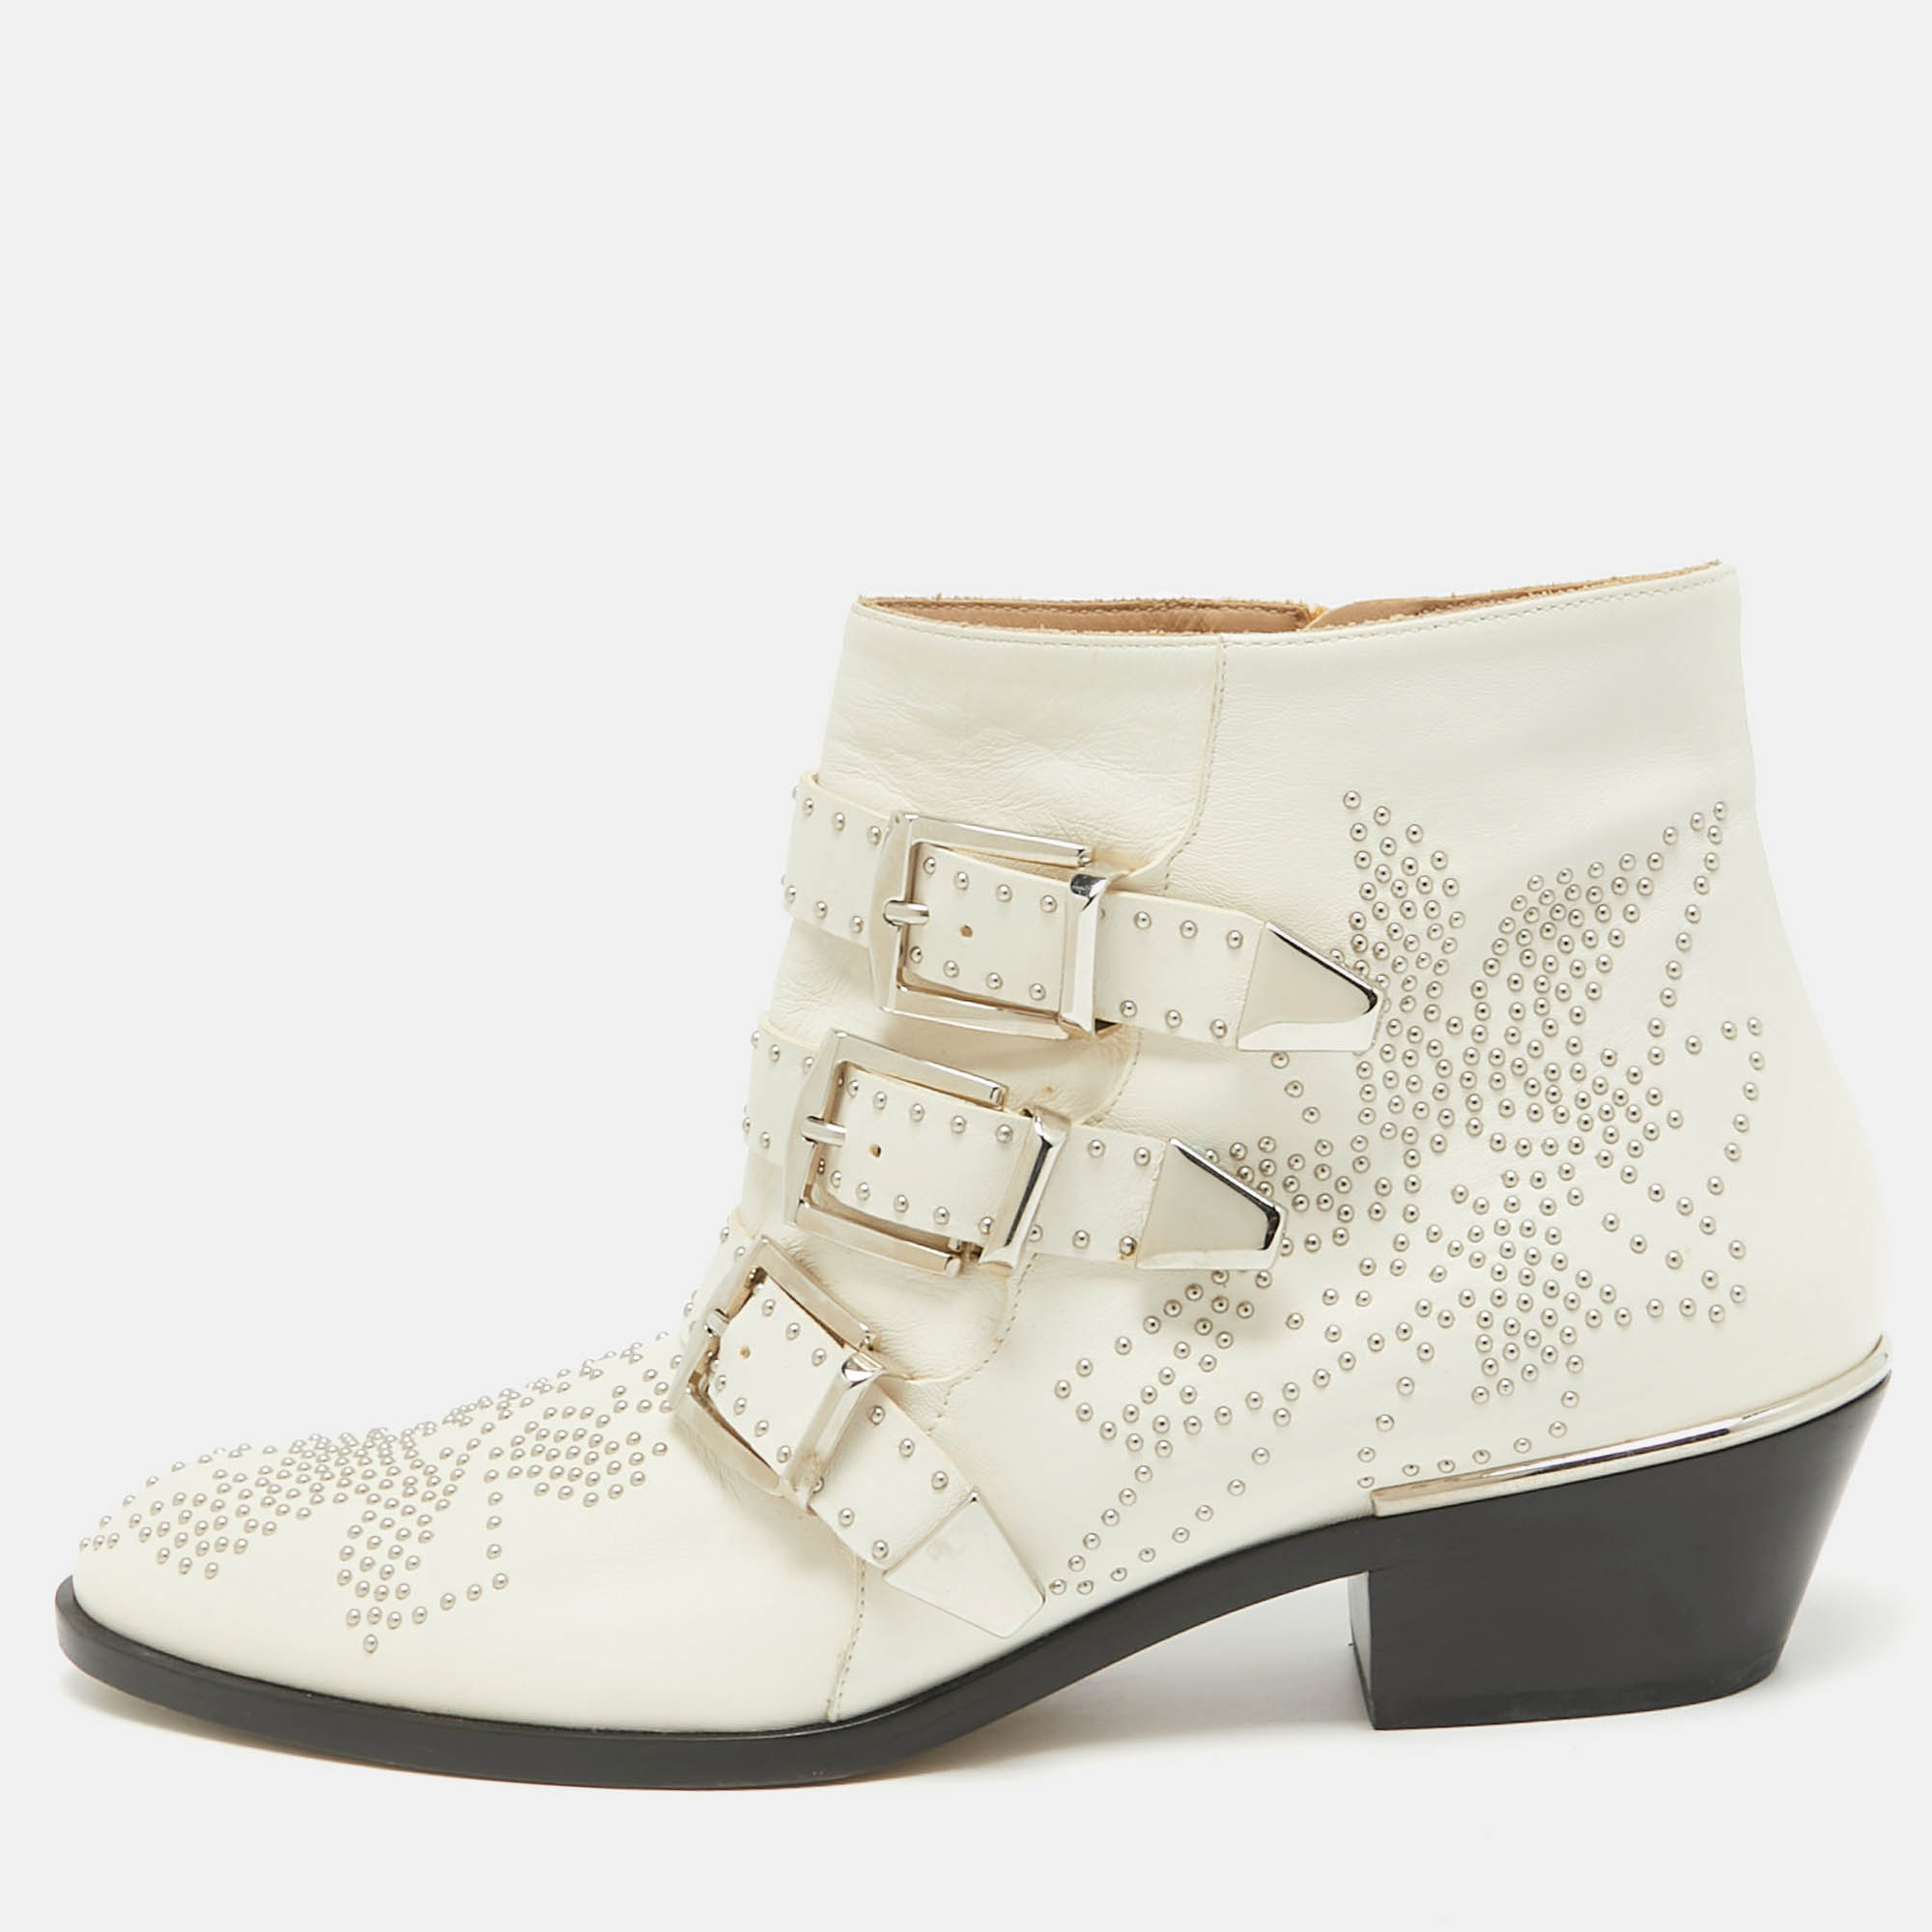 Chloe off white studded leather susanna boots size 37